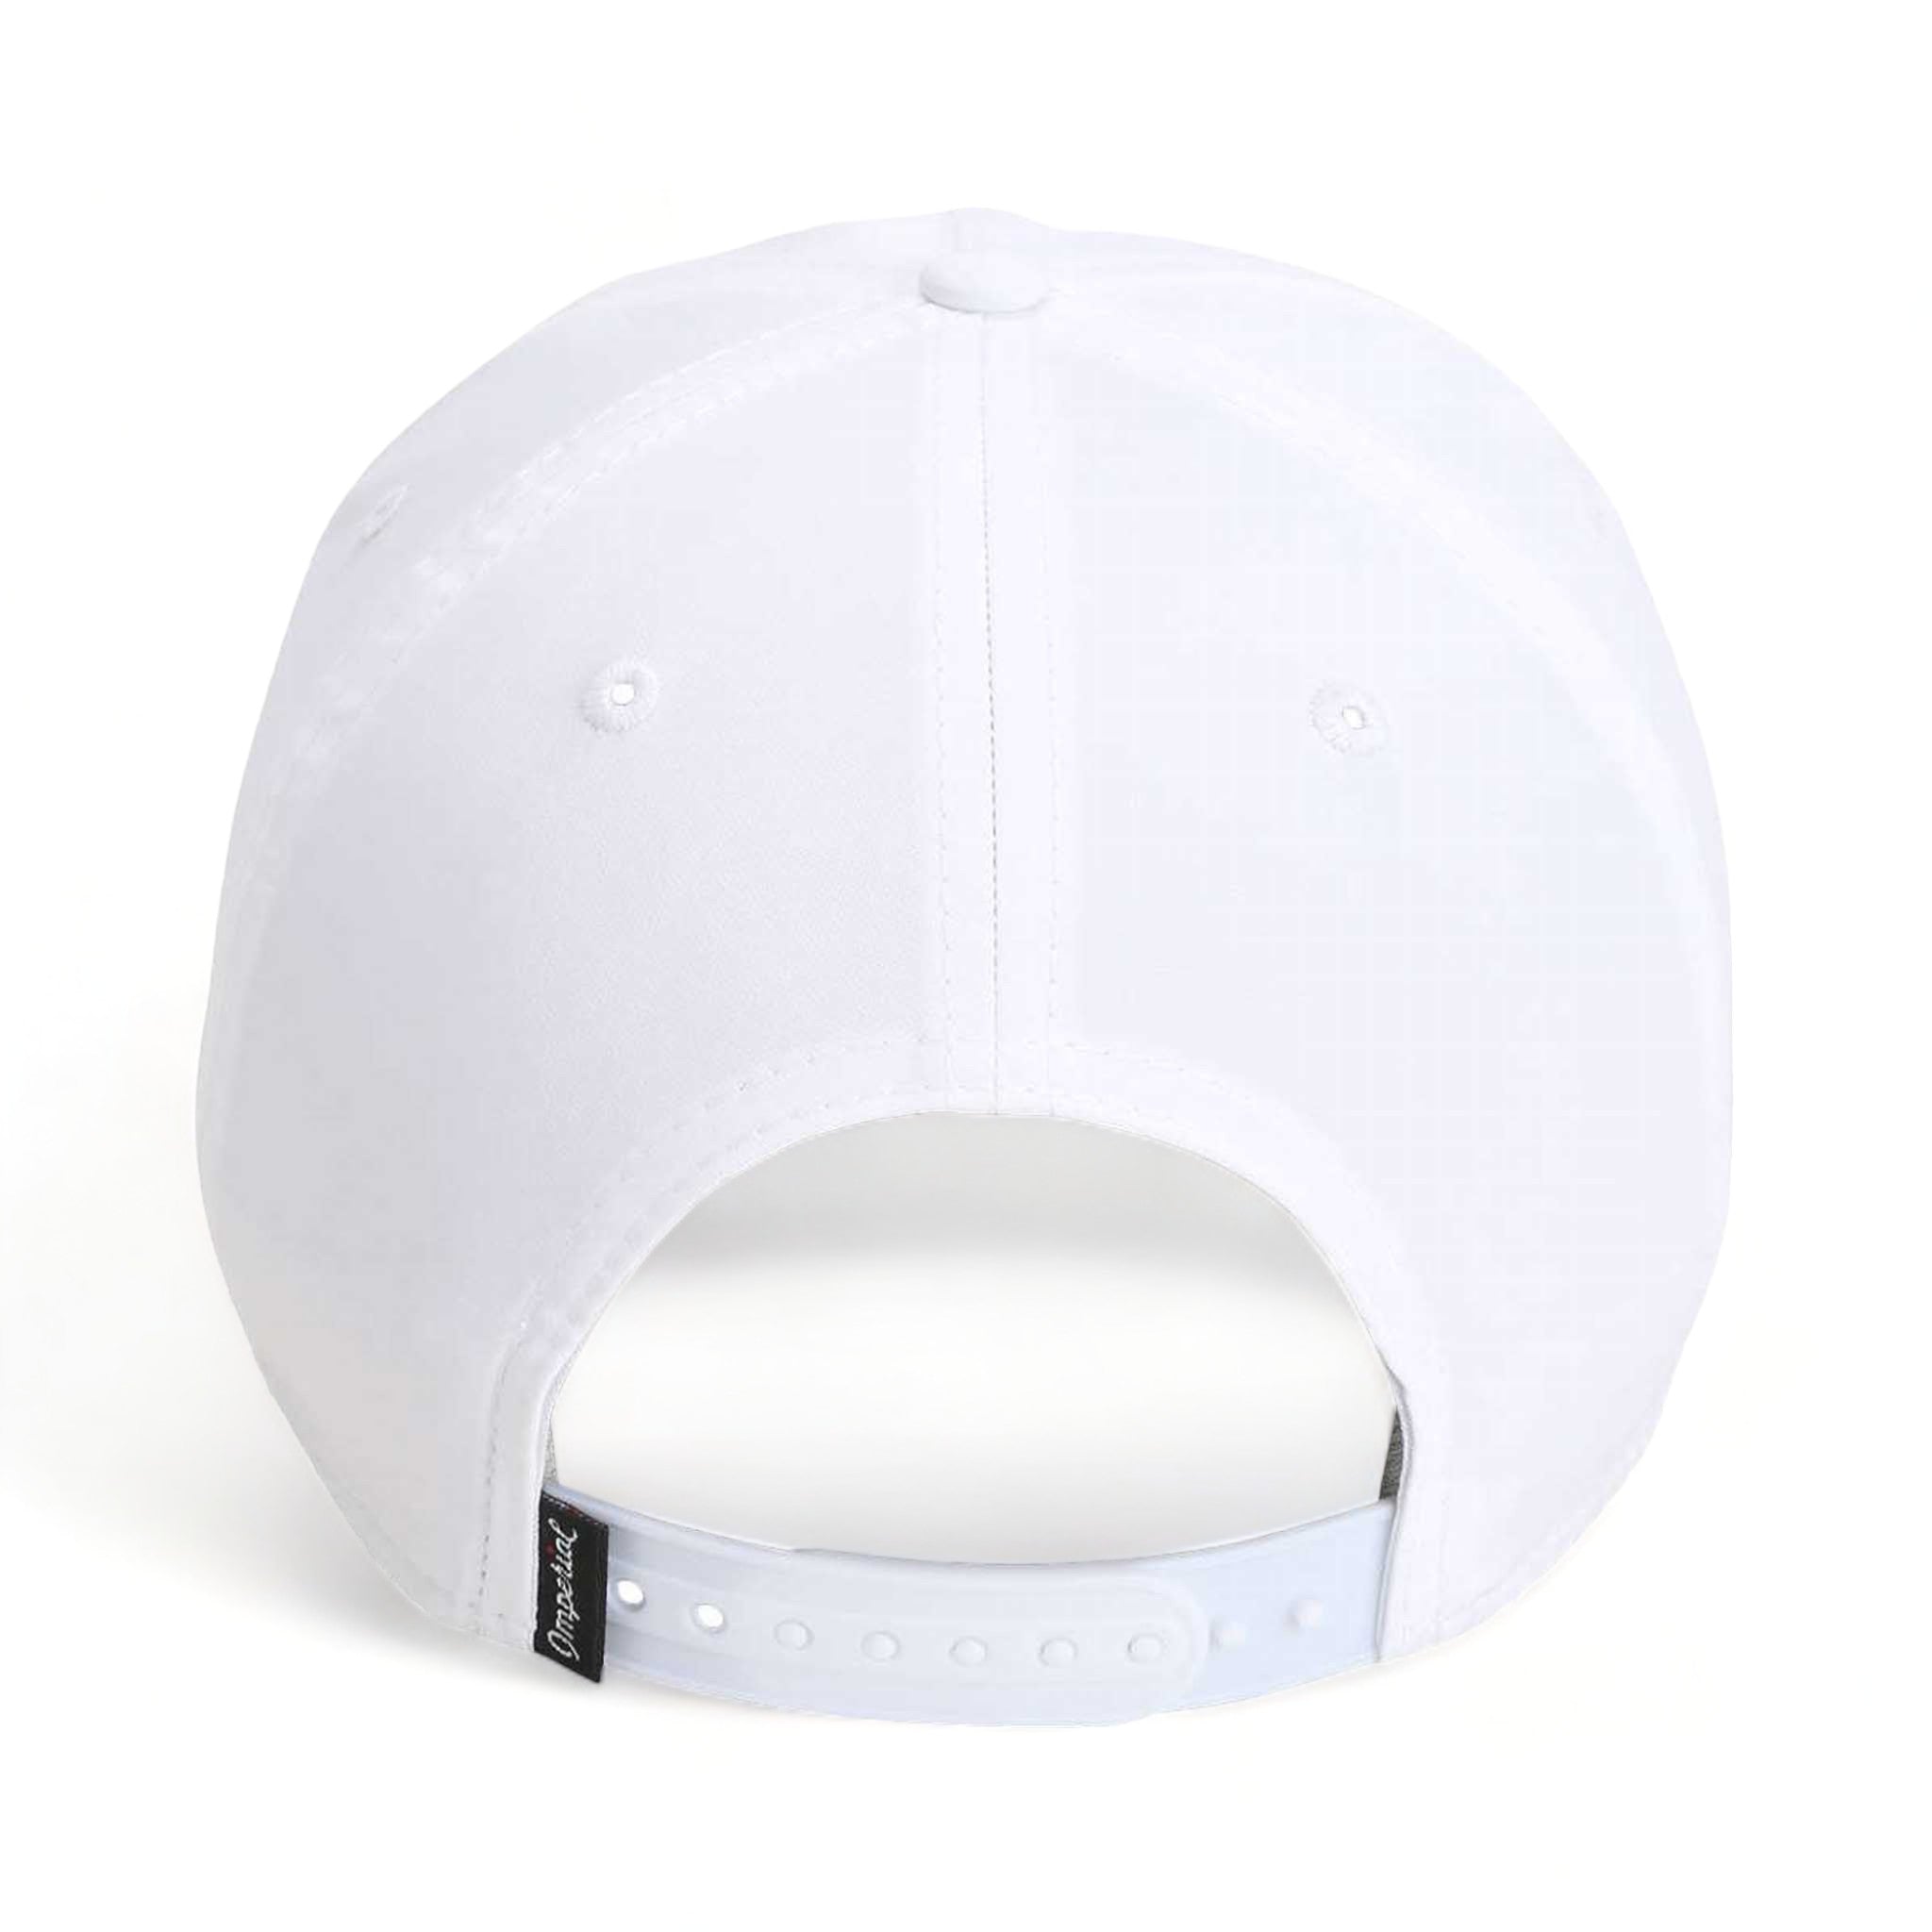 Back view of Imperial 5054 custom hat in white and dark green